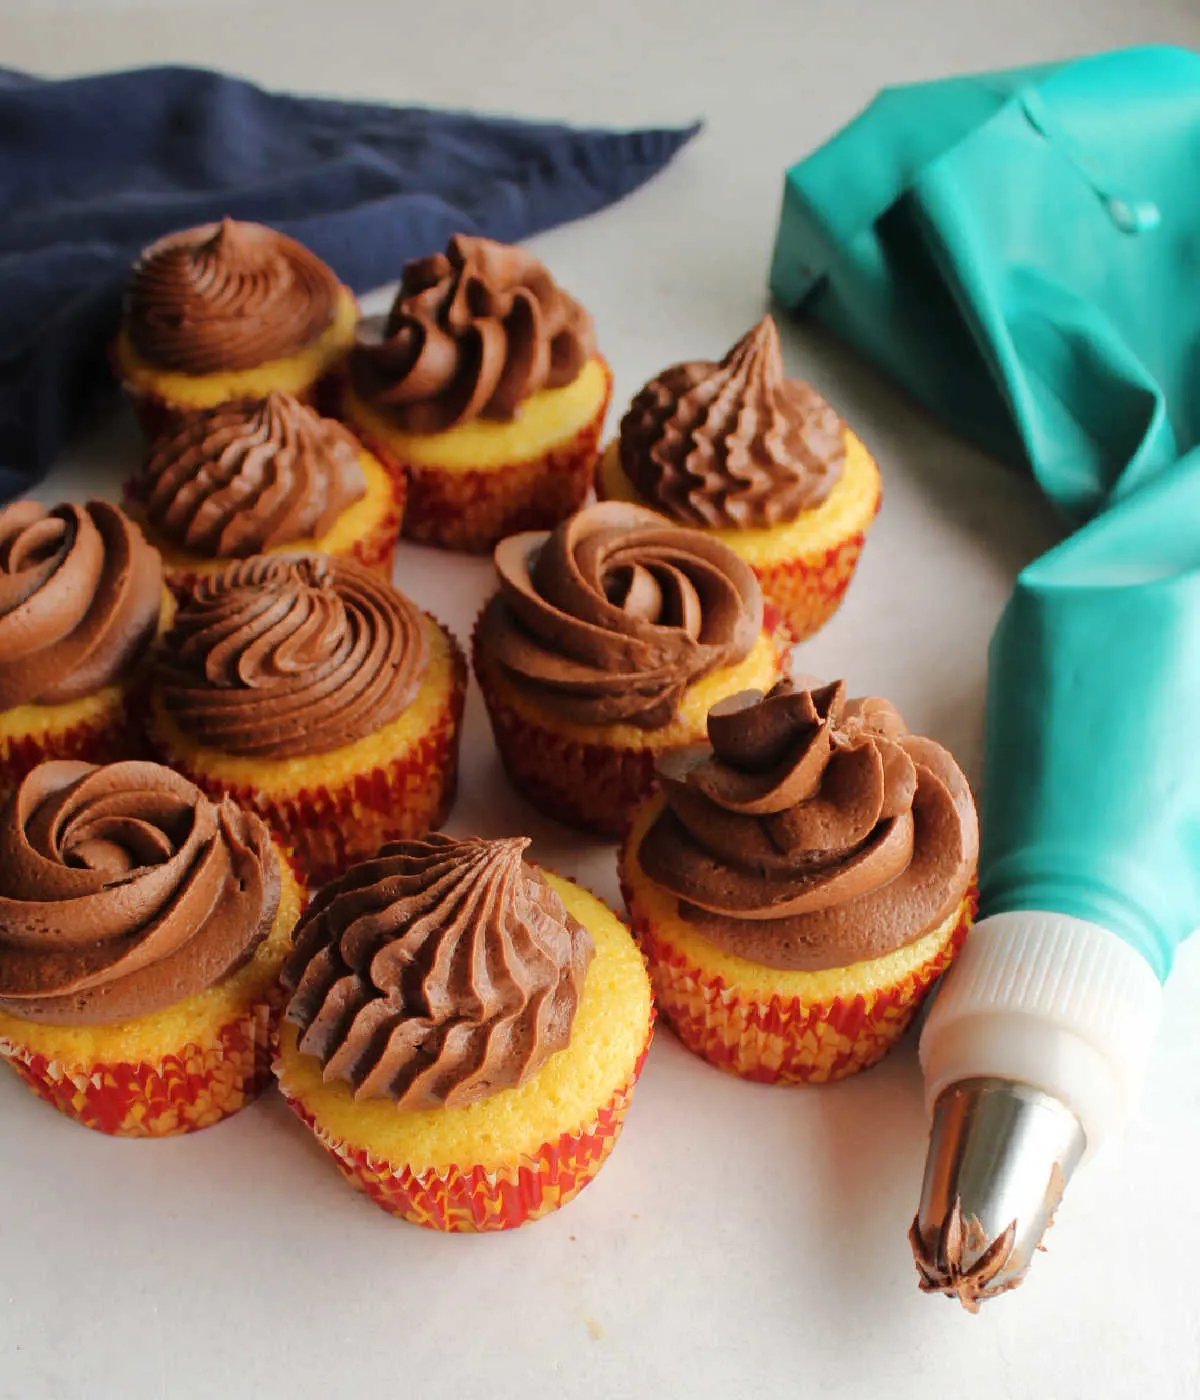 Piping bag filled with fudge frosting next to vanilla cupcakes topped with swirls of piped fudge frosting. 